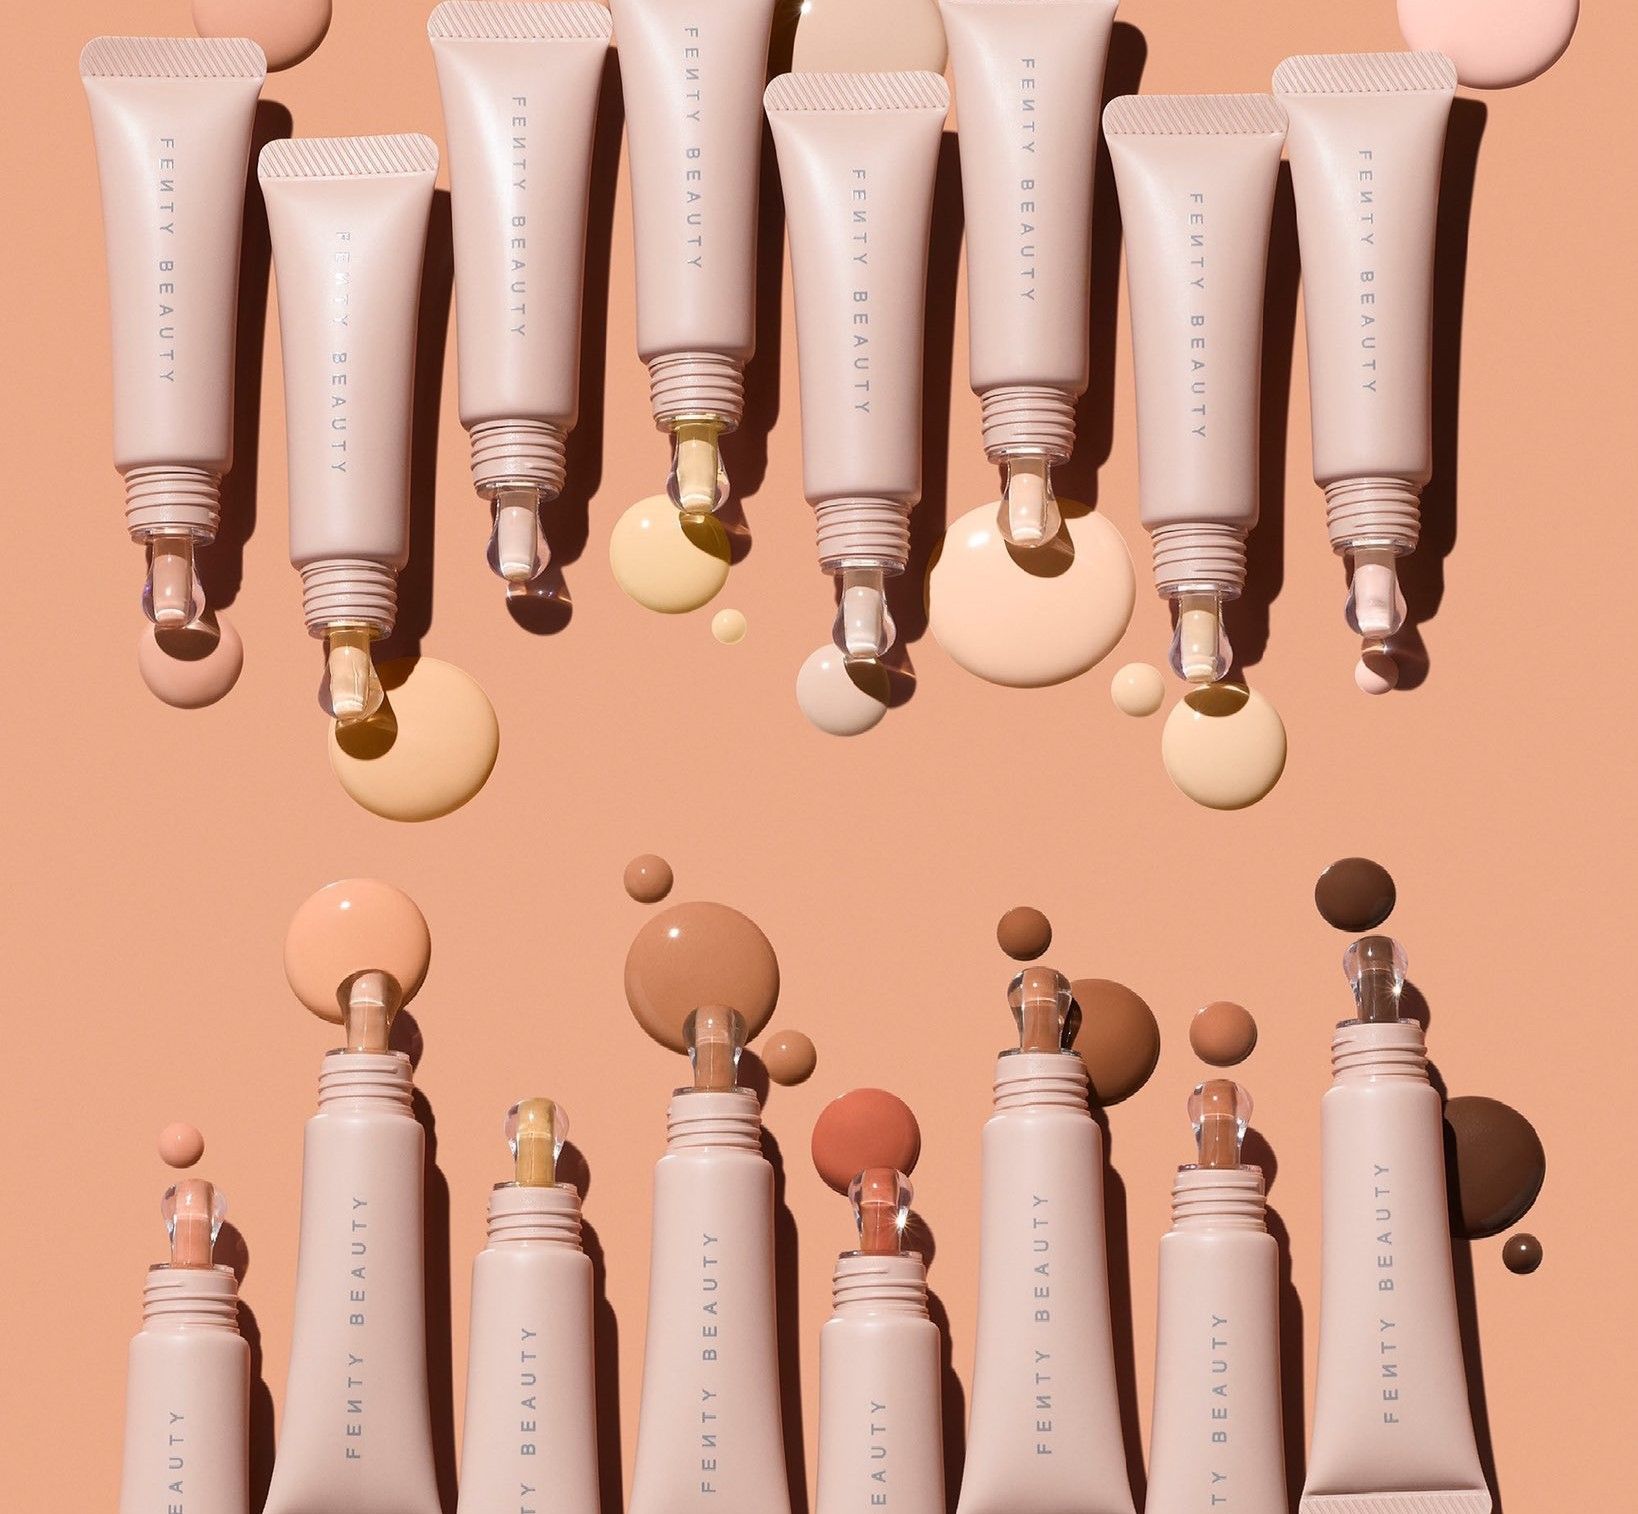 11 of the most inclusive beauty brands you should know about